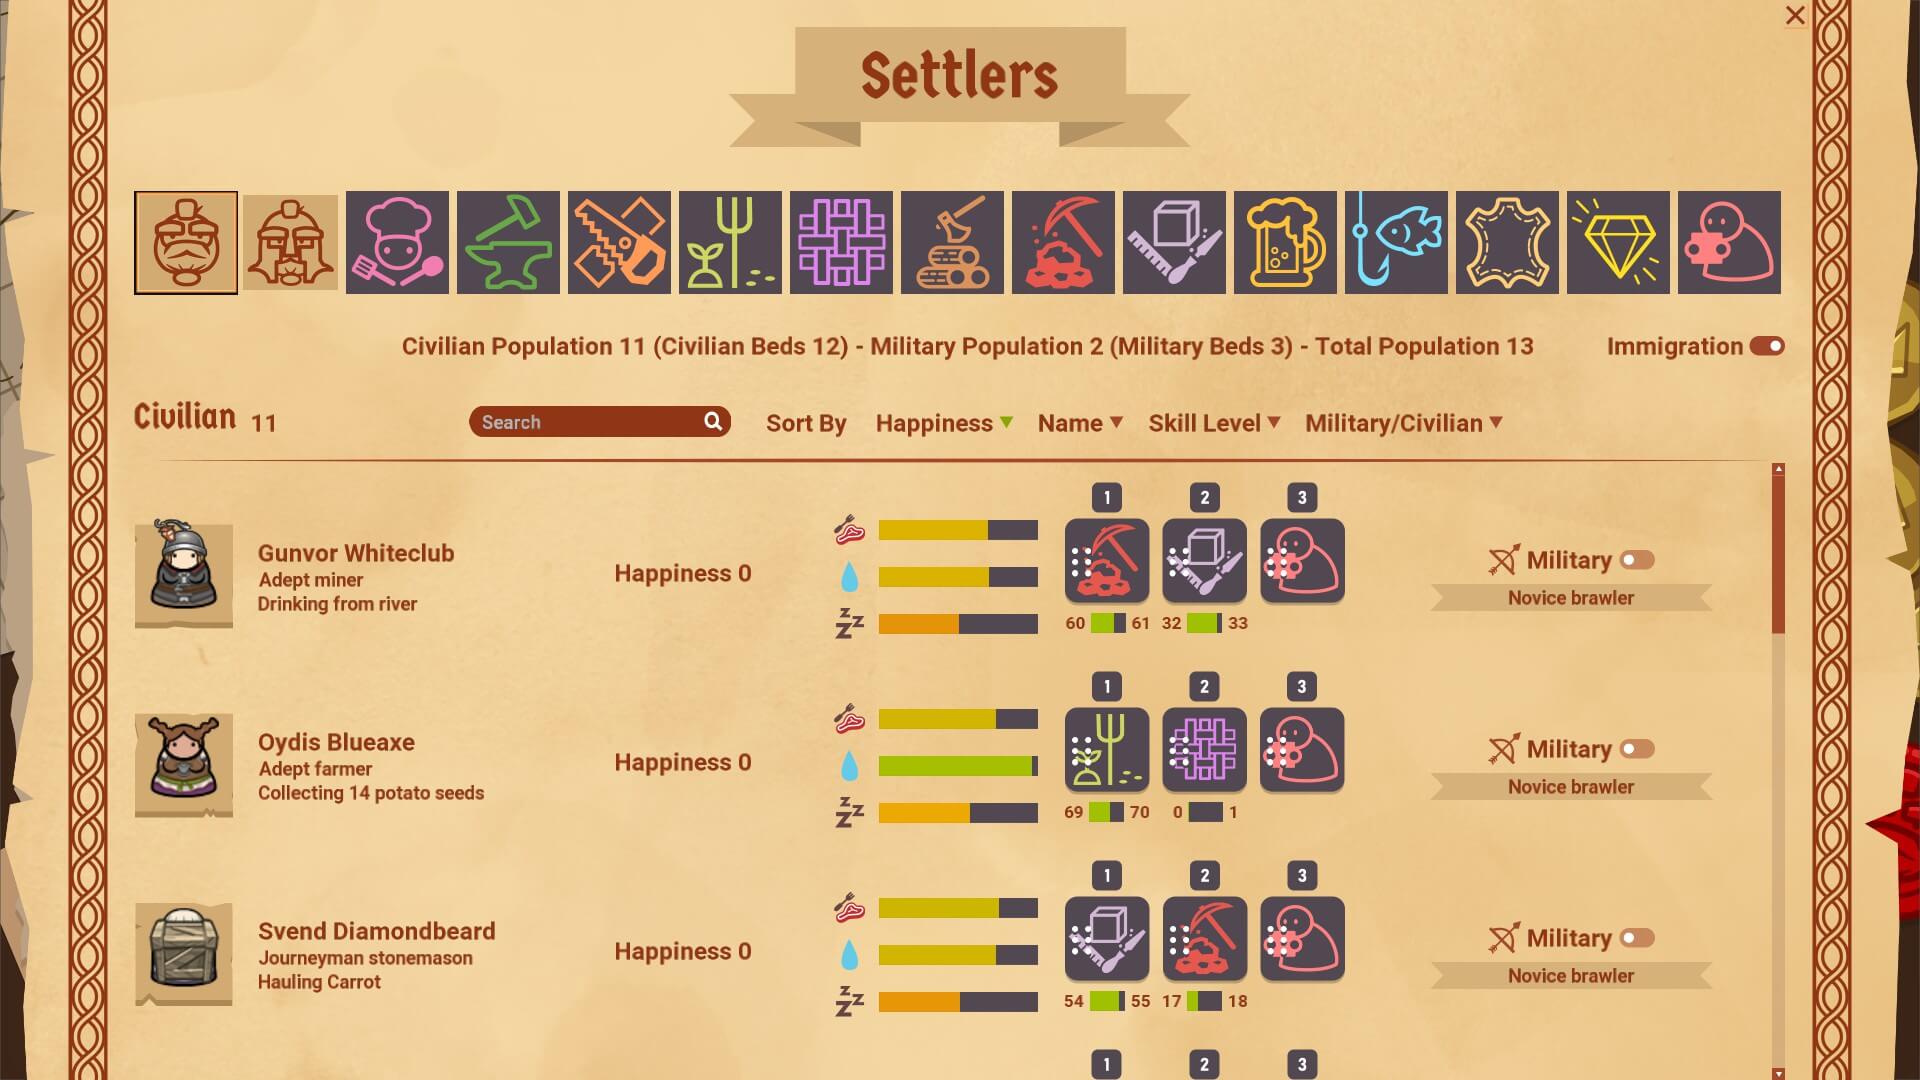 Settler overview is shown. Each settler's happiness, vitals, and assigned skills are shown.